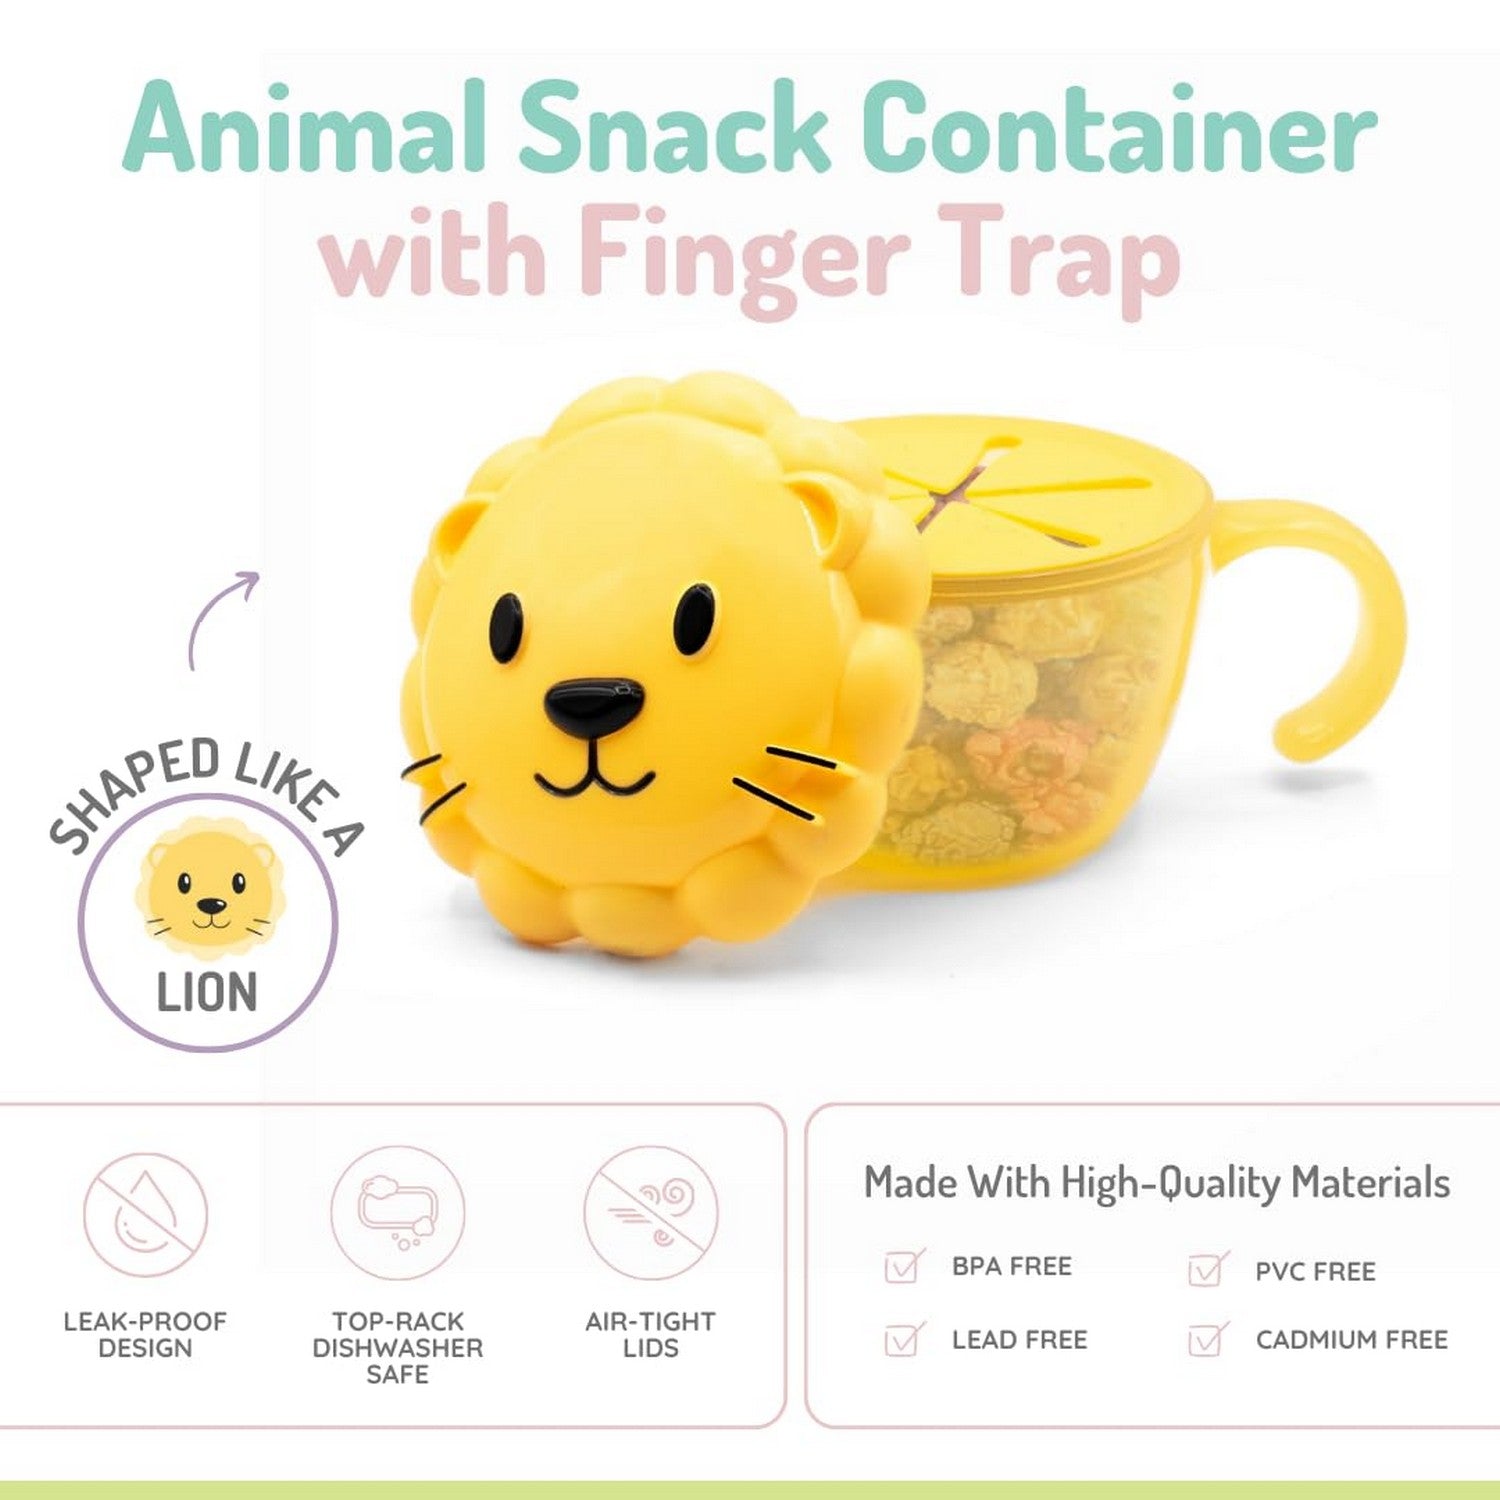 Melii Snack Container with Finger Trap - Lion Yellow